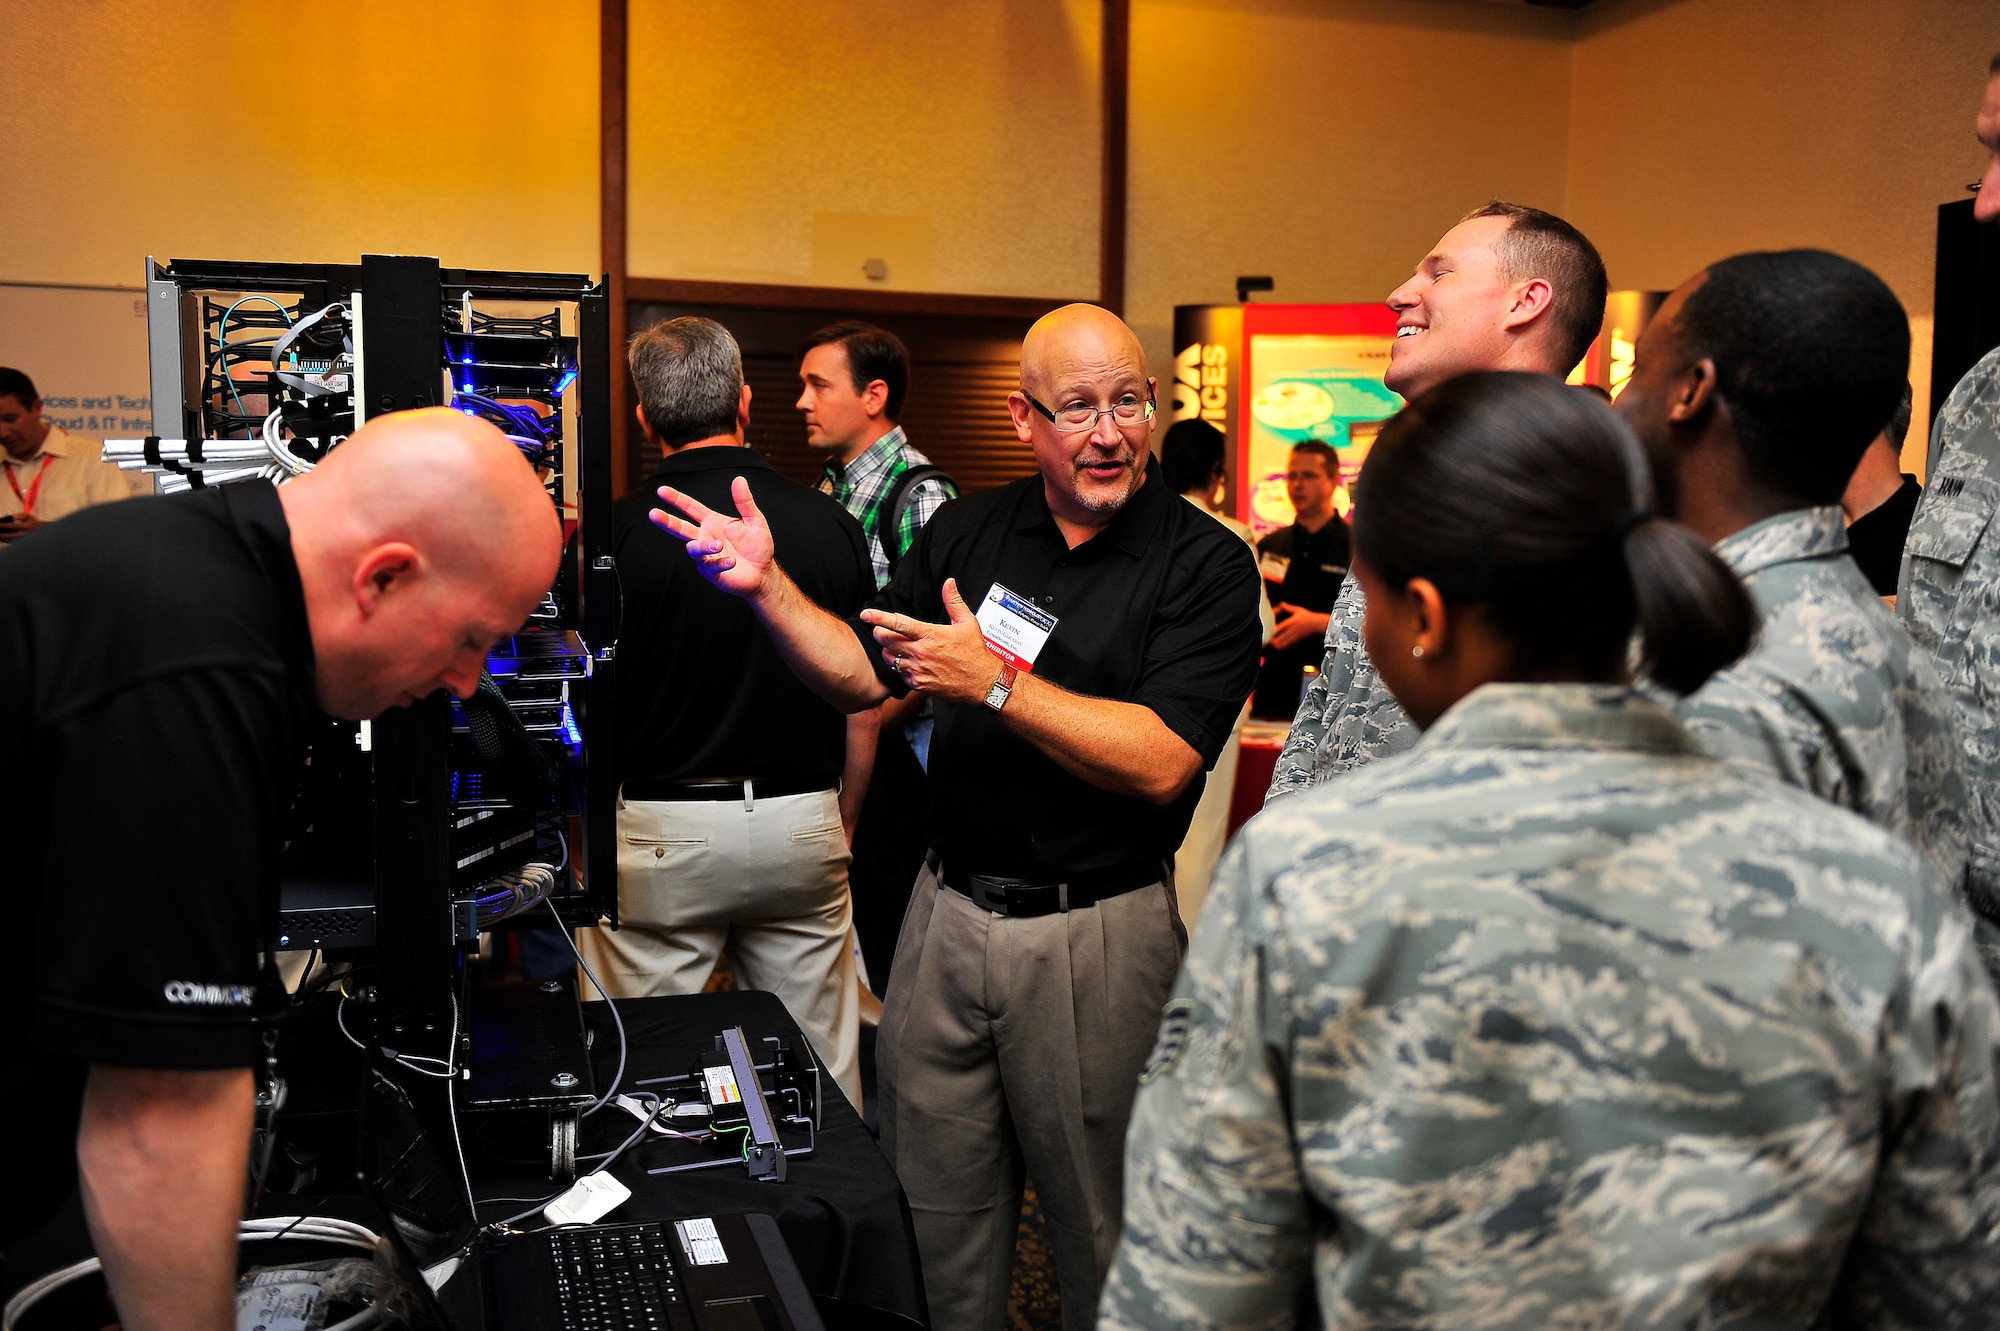 The Kaiserslautern Armed Forces Communications and Electronics Association, Chapter 158 hosted the 2012 Technology Expo at the Officer’s Club on Ramstein Air Base, Germany, July 17, 2012.  The event themed, "Discovering solutions for every mission" wowed more than 700 military members, civilians and contractors on the advances in modern technology to support global warfighting capabilities.  Attendees sign-in before entering the event..  CommScope representative explains the the make up of the featured system.  (U.S. Air Force photo/Staff Sgt. Daylena Gonzalez) 
